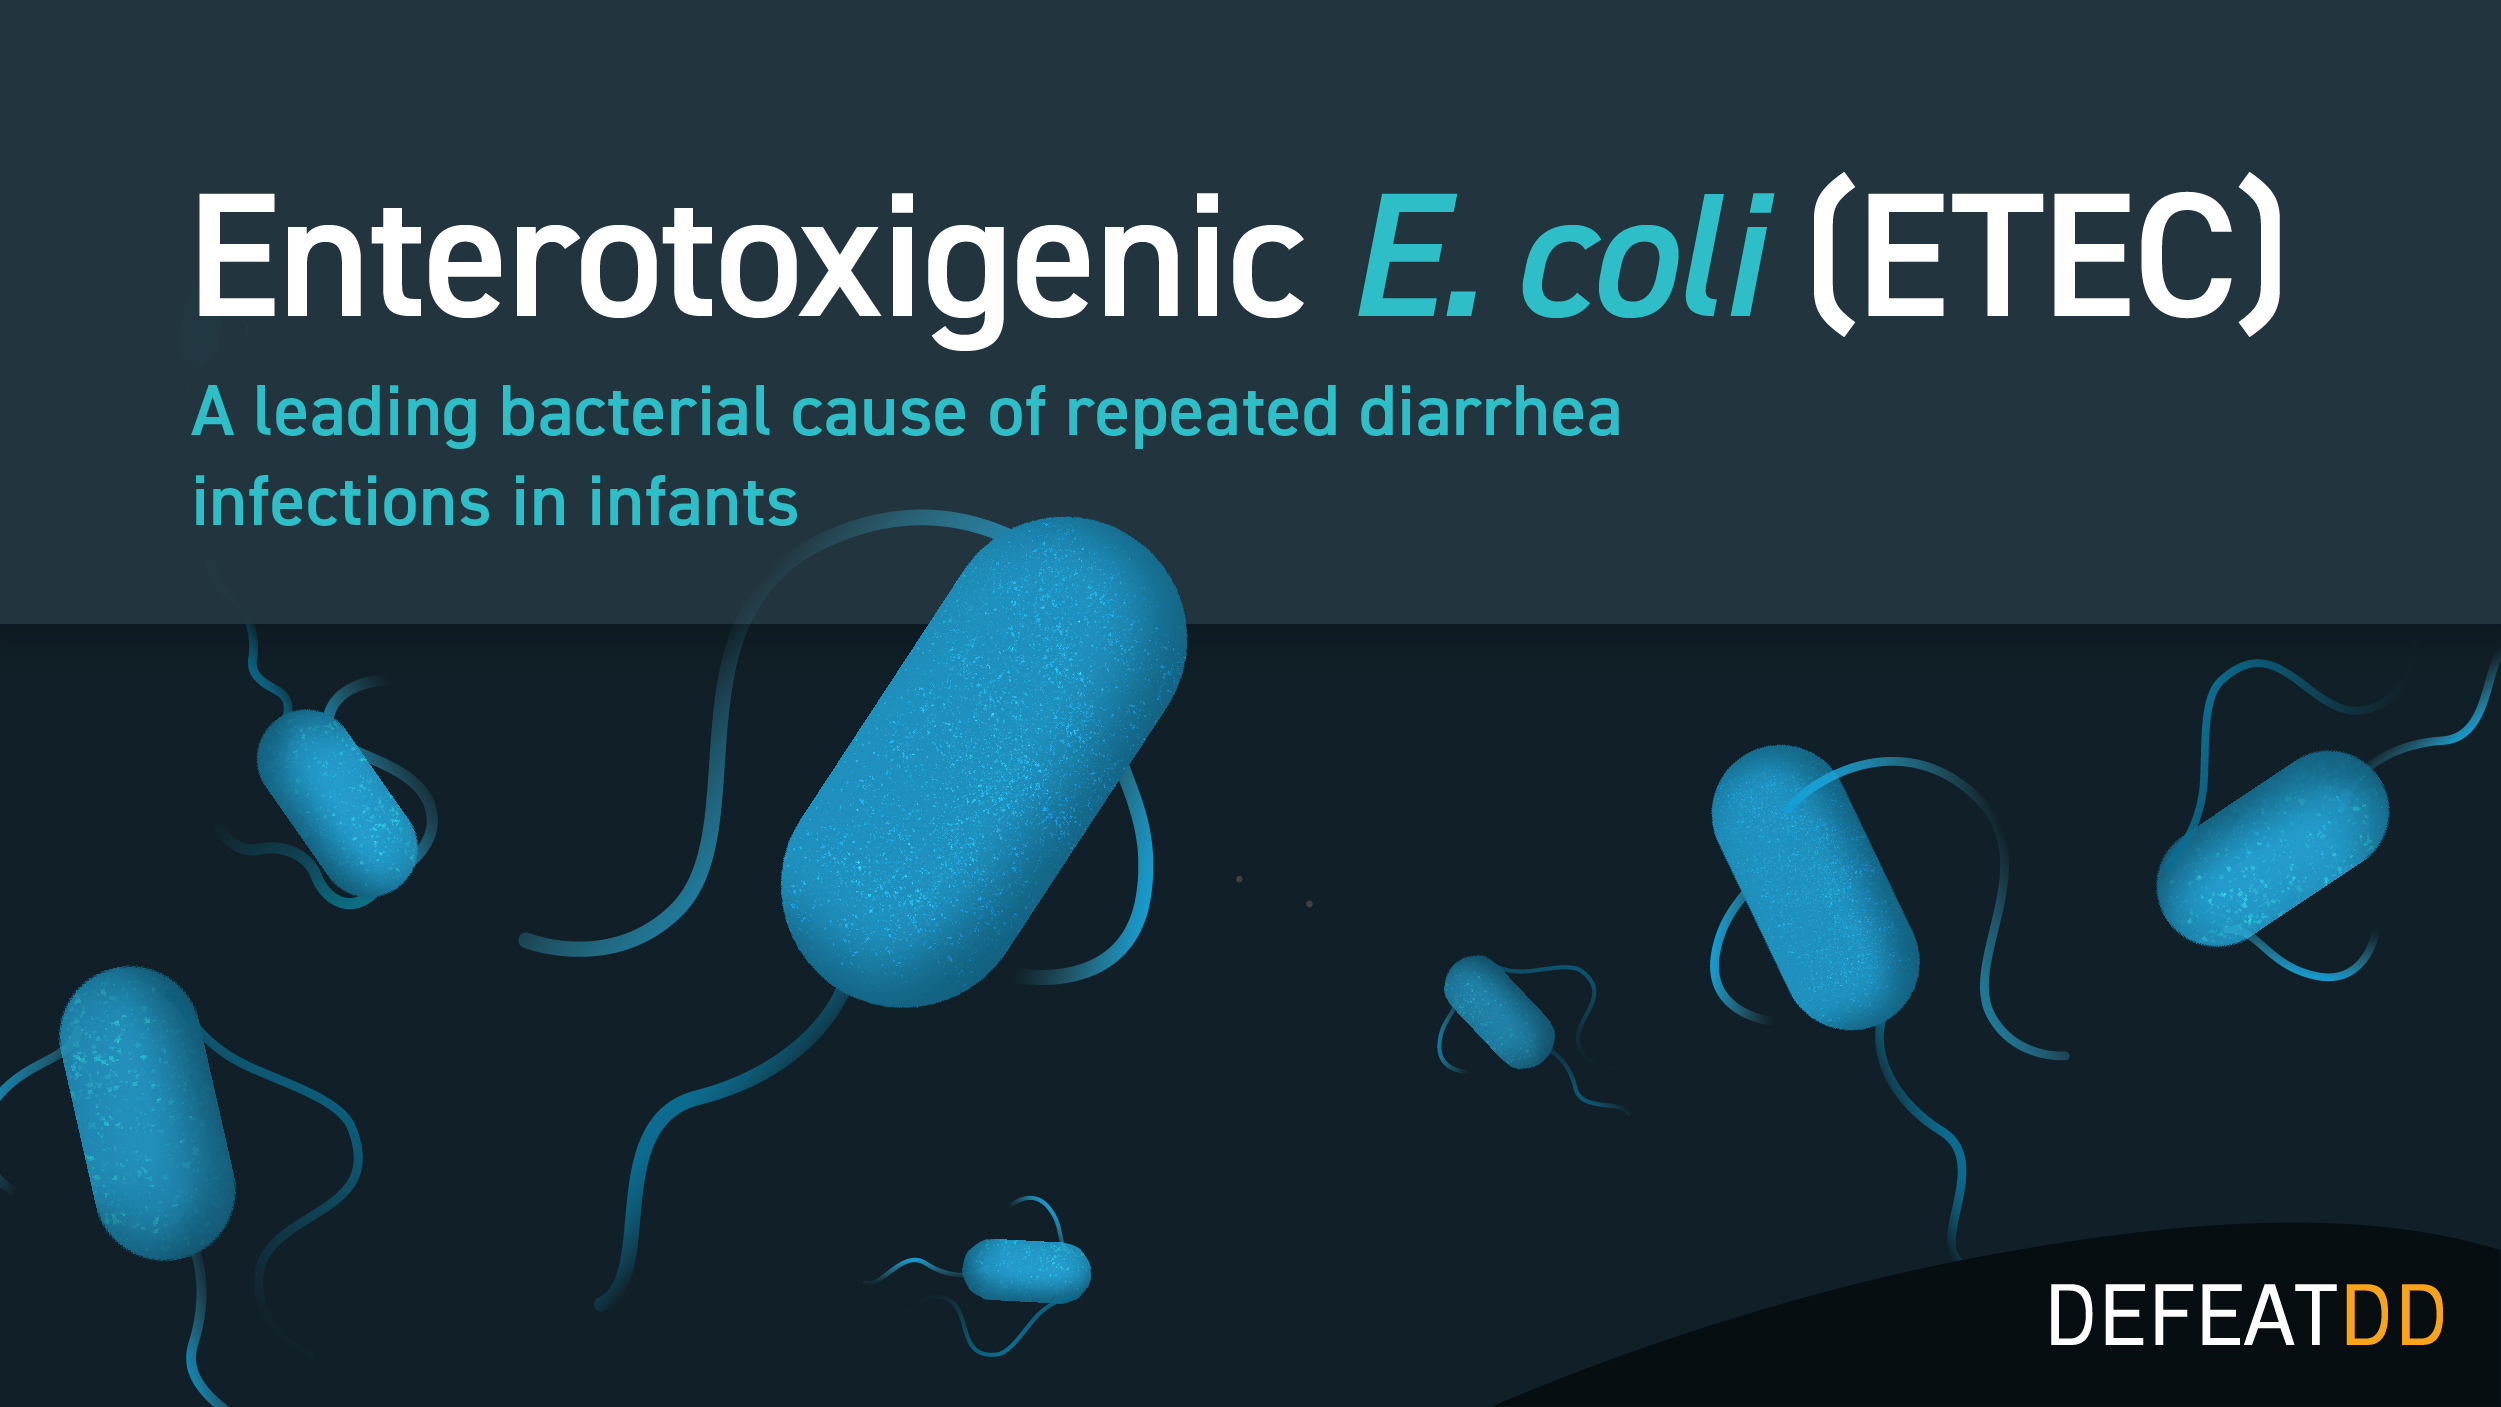 Graphic of ETEC bacteria with text overlay that states, "Enterotoxigenic E.coli (ETEC): A leading bacterial cause of repeated diarrhea infections in infants")